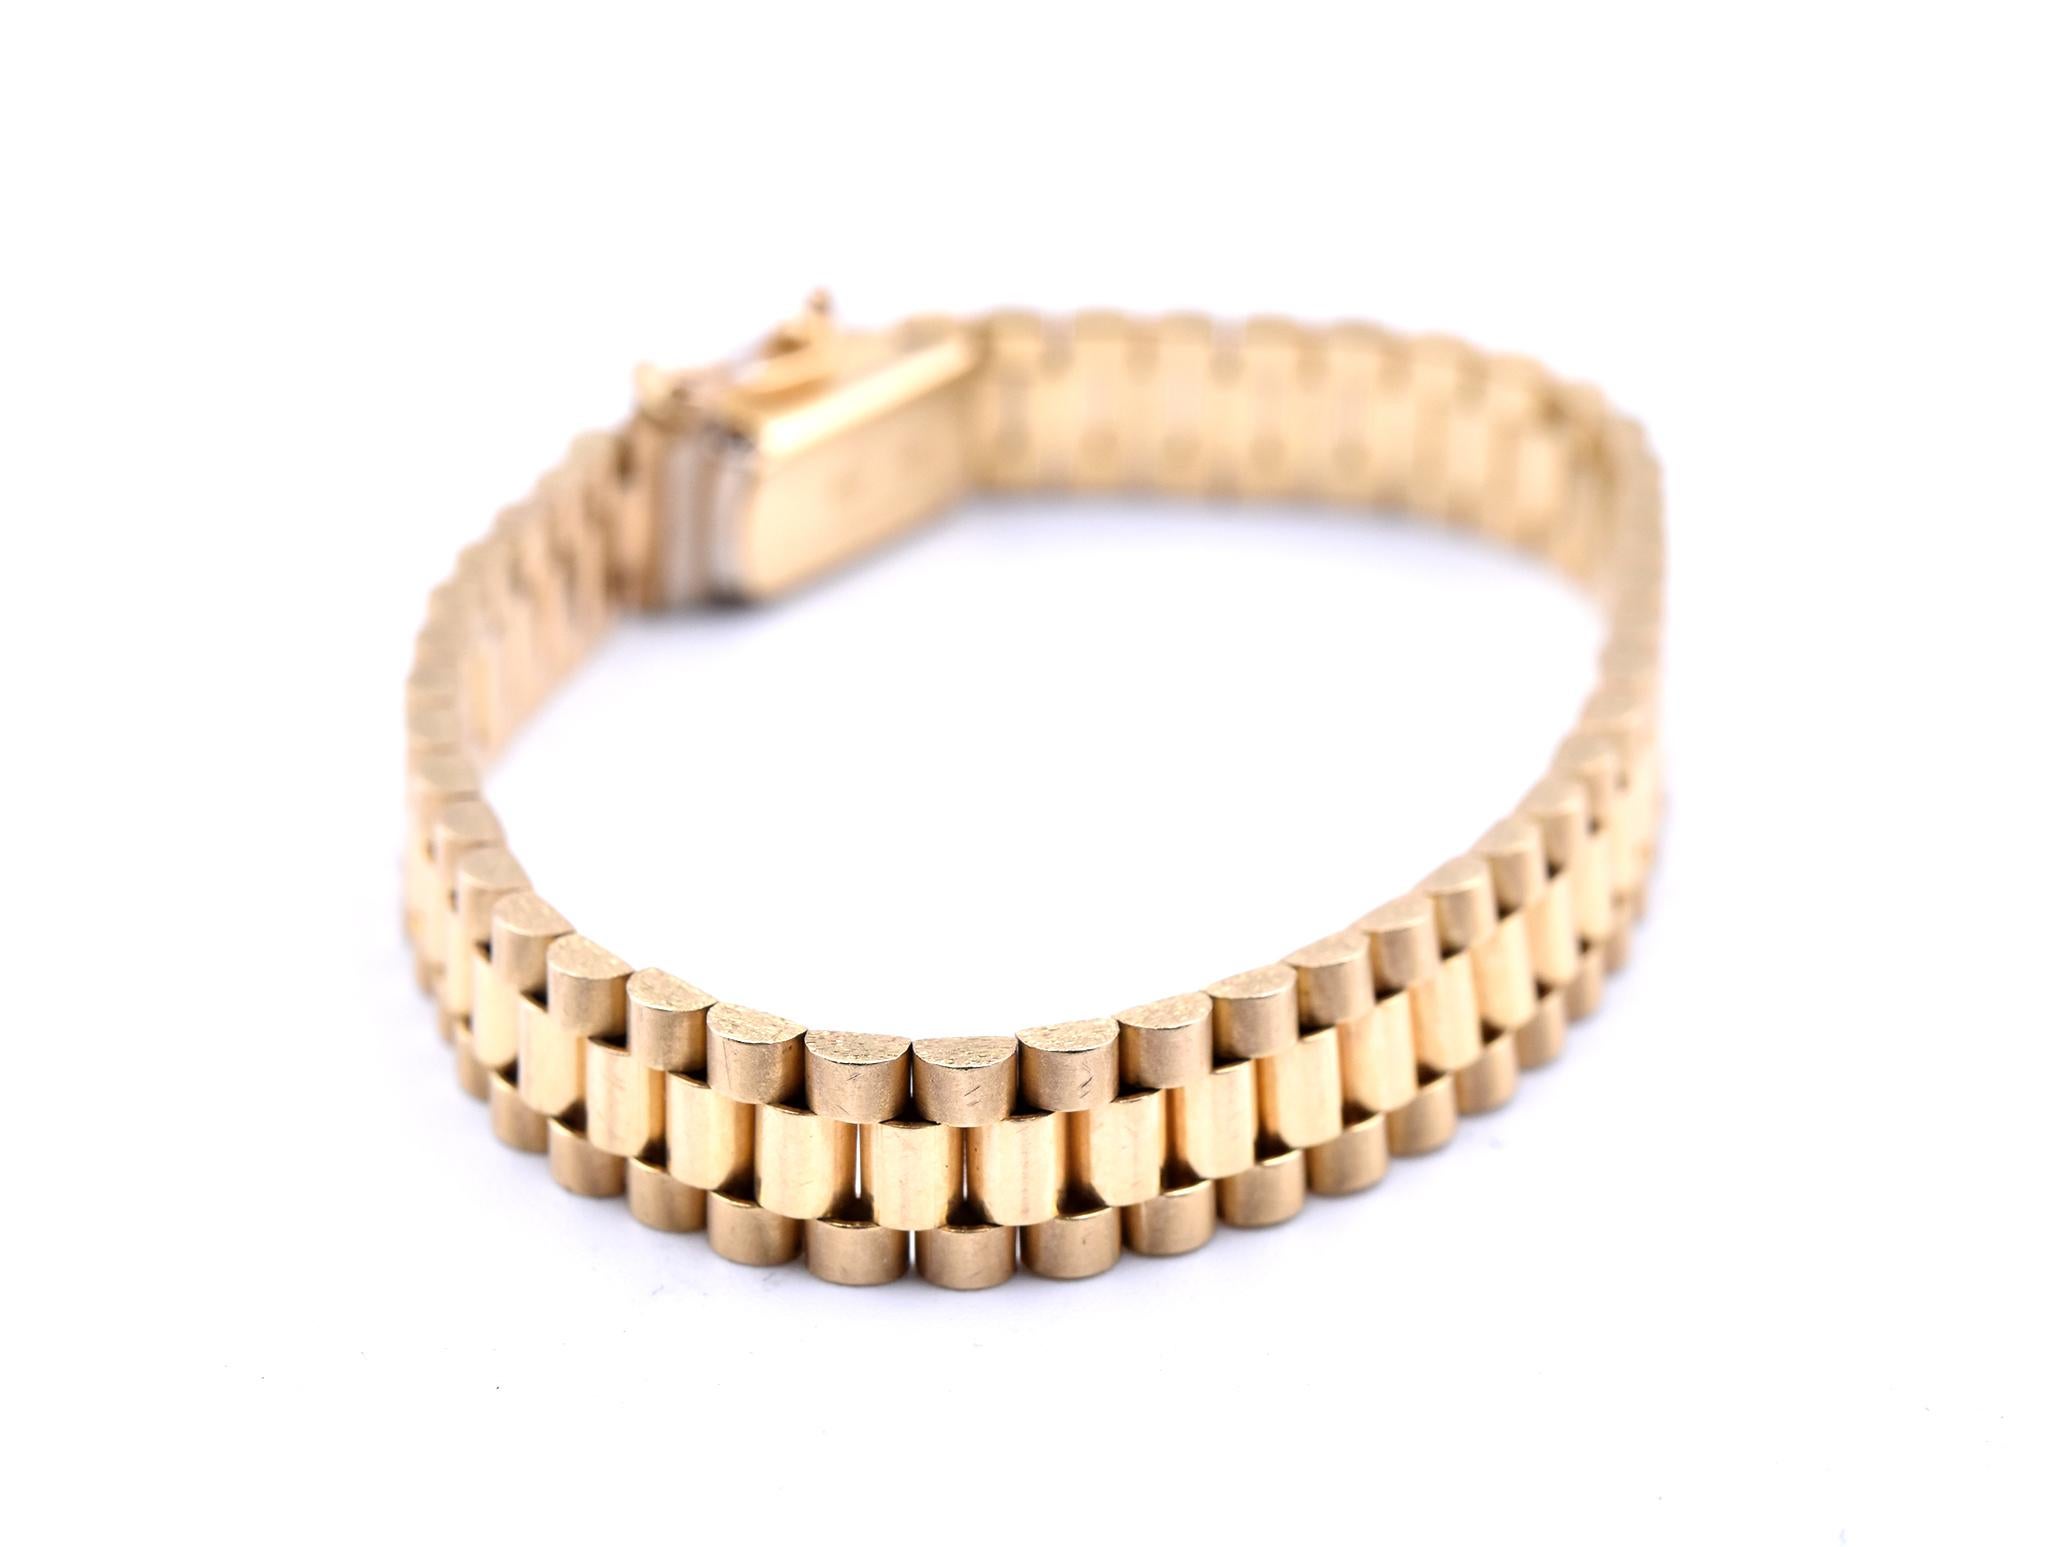 Designer: custom design
Material: 14k yellow gold
Dimensions: bracelet is 5-inches long, 6.51mm wide
Weight: 12.09 grams
